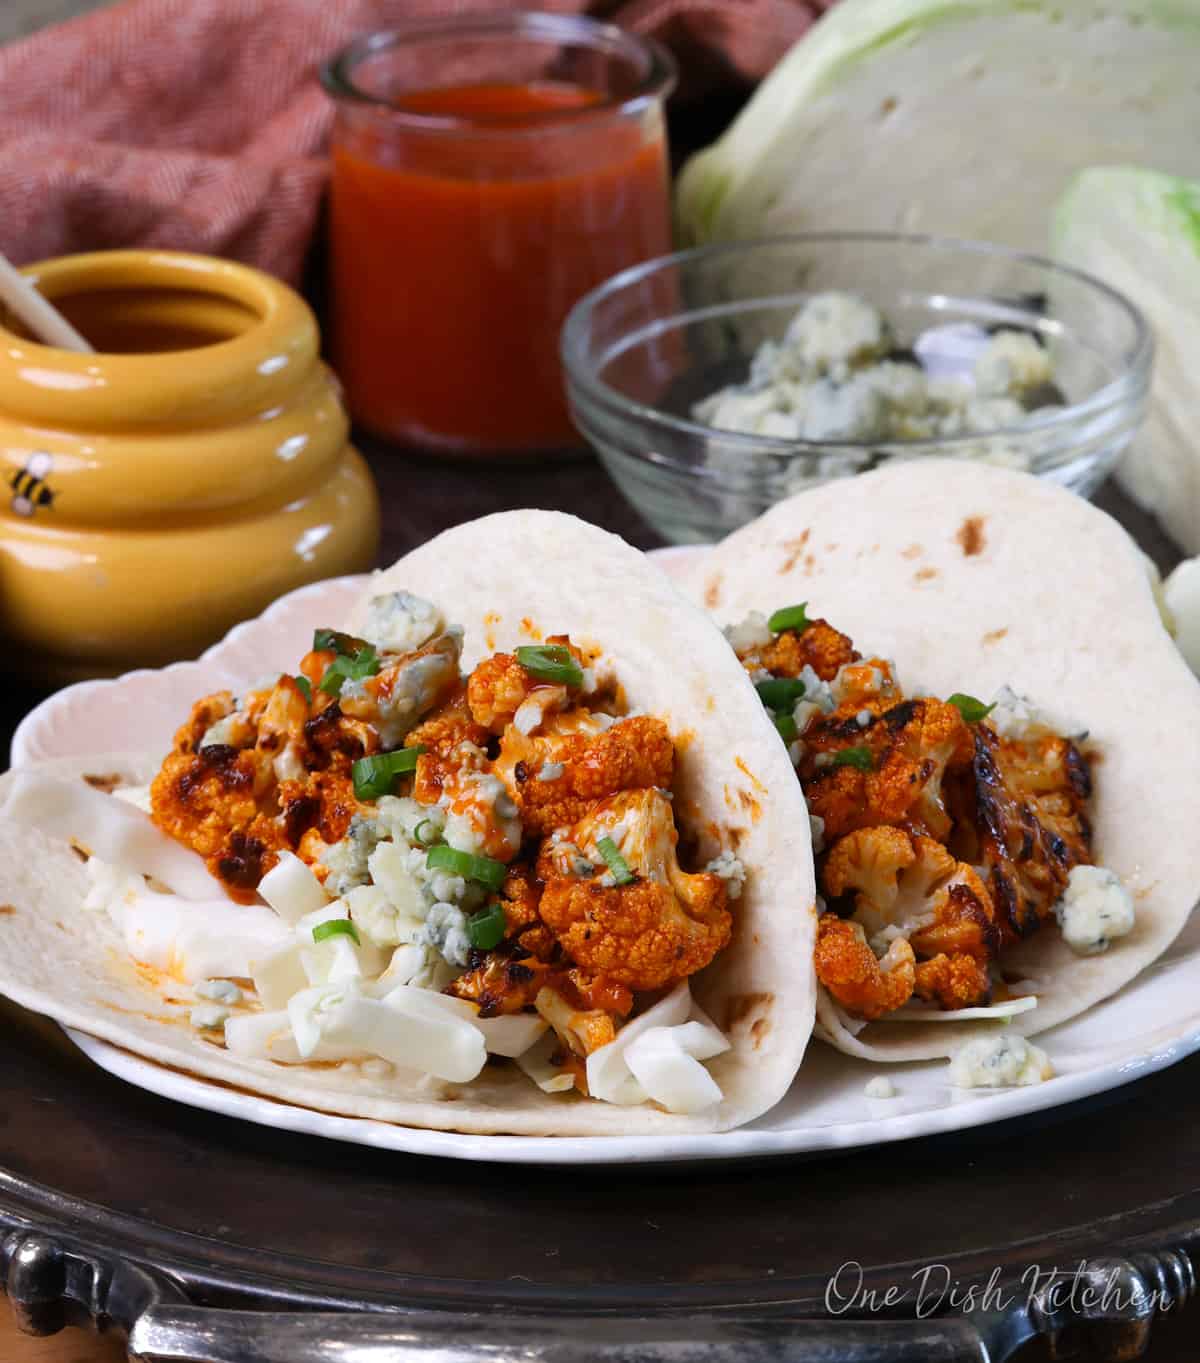 two buffalo cauliflower tacos on a plate next to a bowl of blue cheese crumbles and a jar of honey.